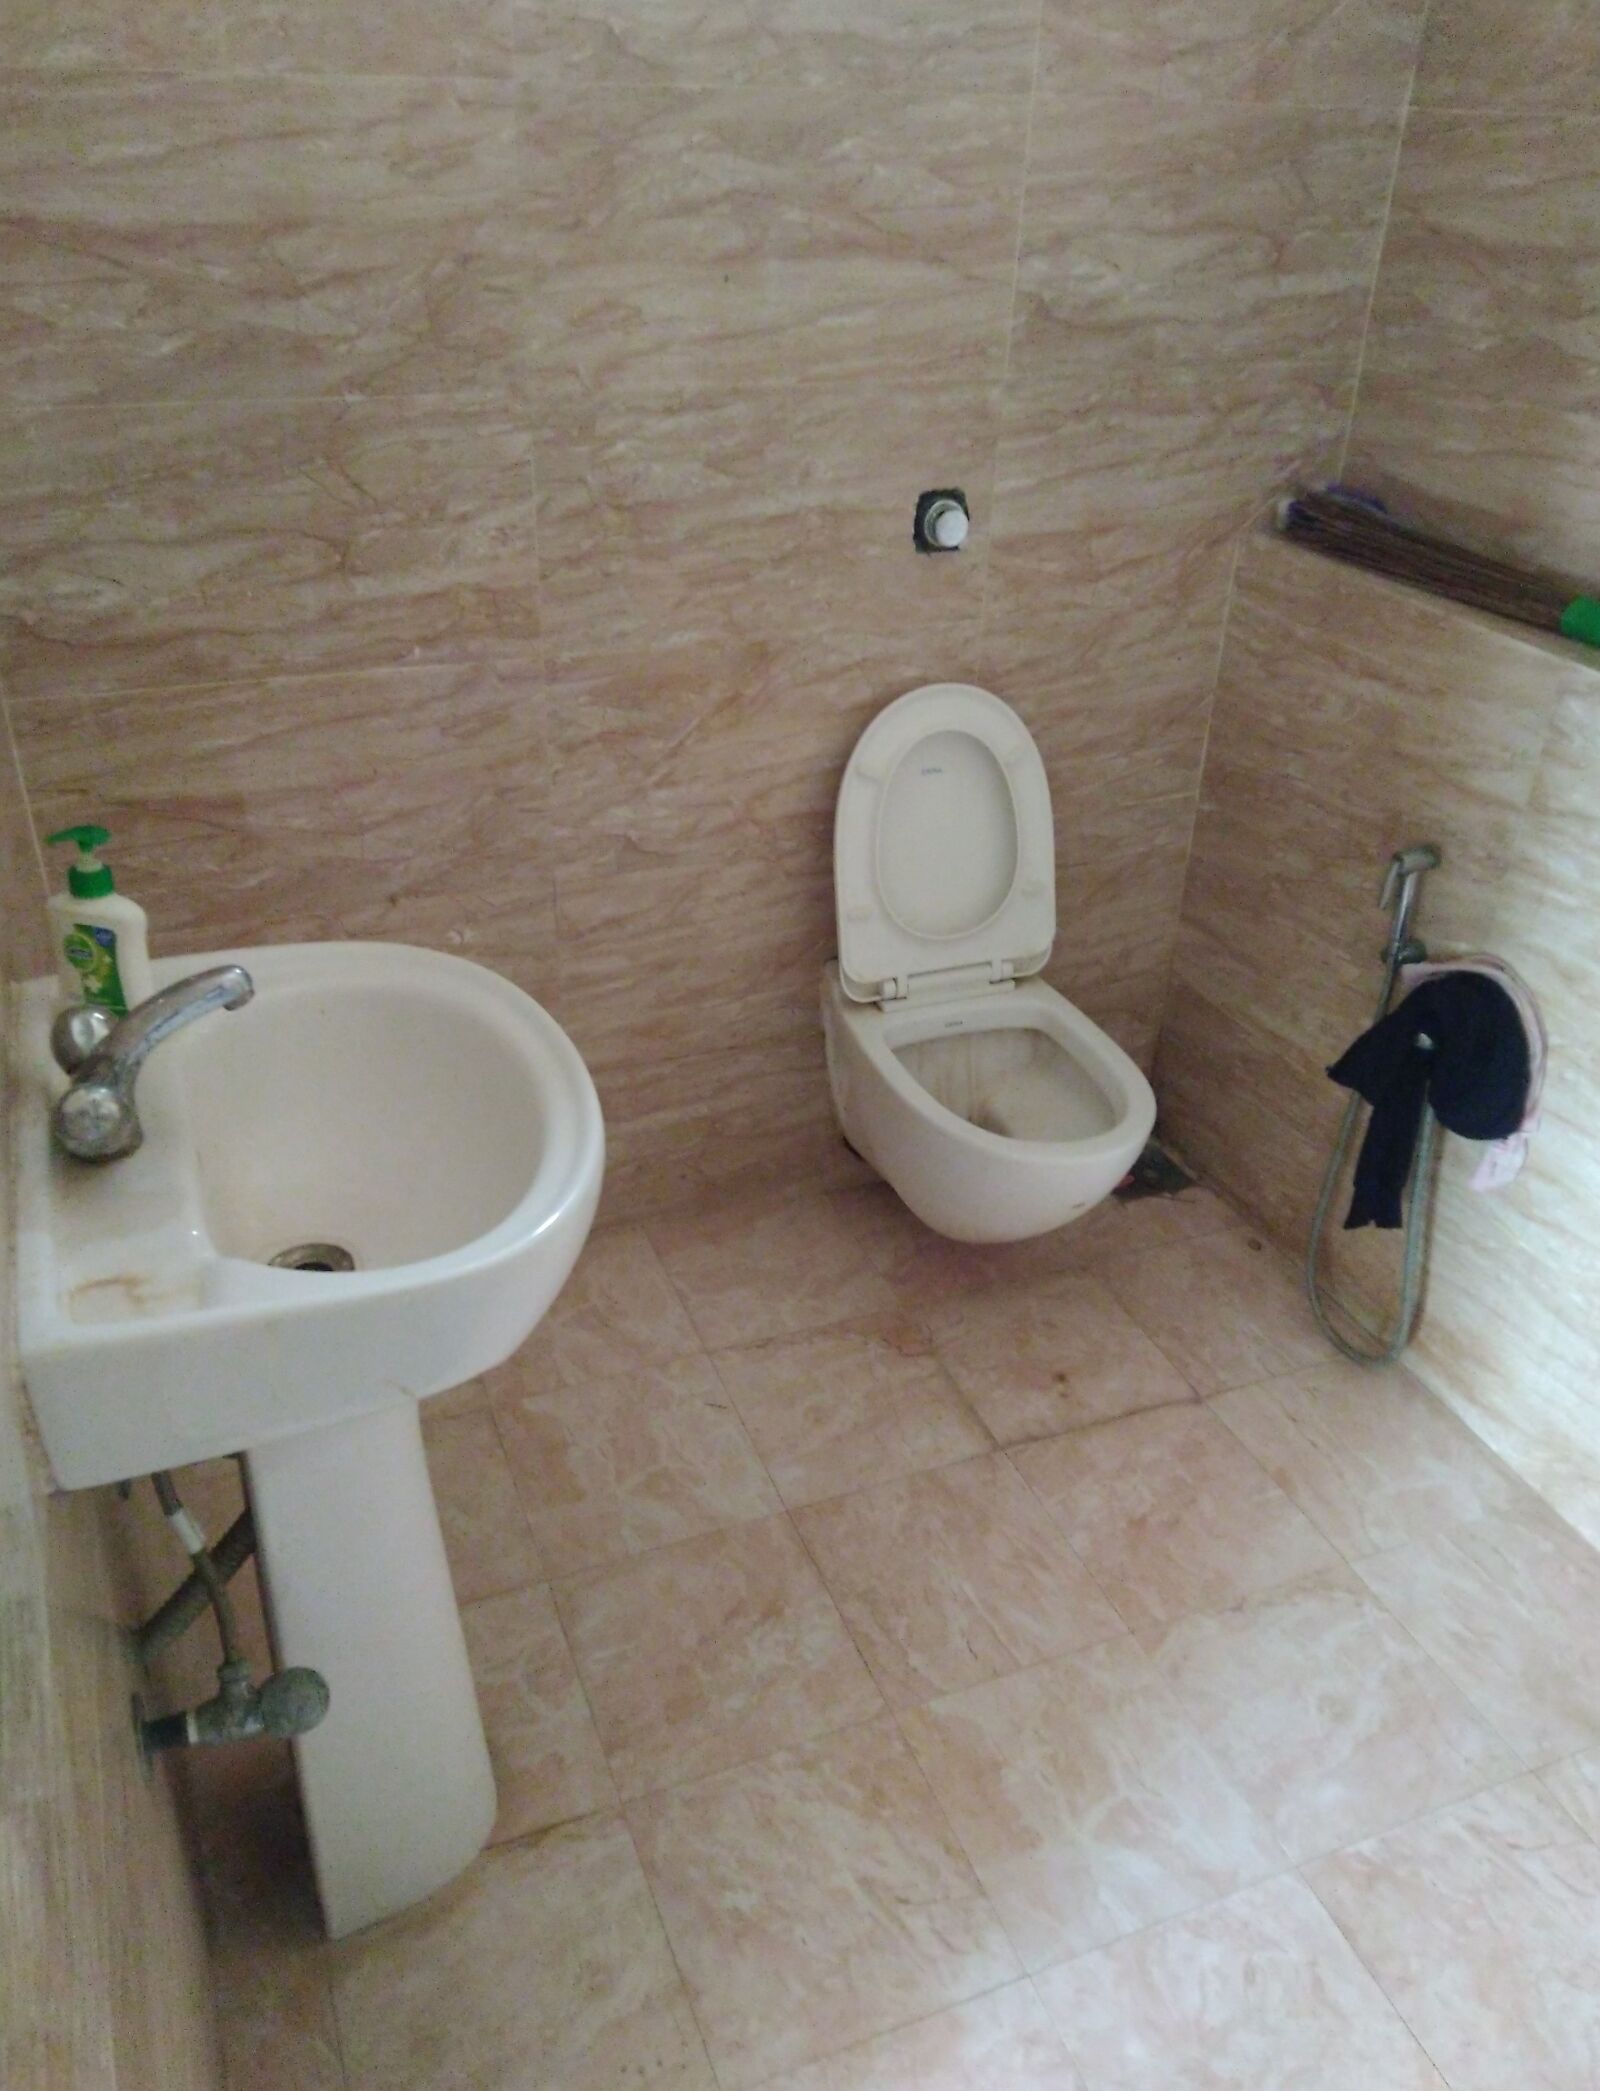 ASUS ZenFone Max Pro M1 (ZB602KL) (WW) / Max Pro M1 (ZB601KL) (IN) sample photo. Toilet, wc, bathroom photography